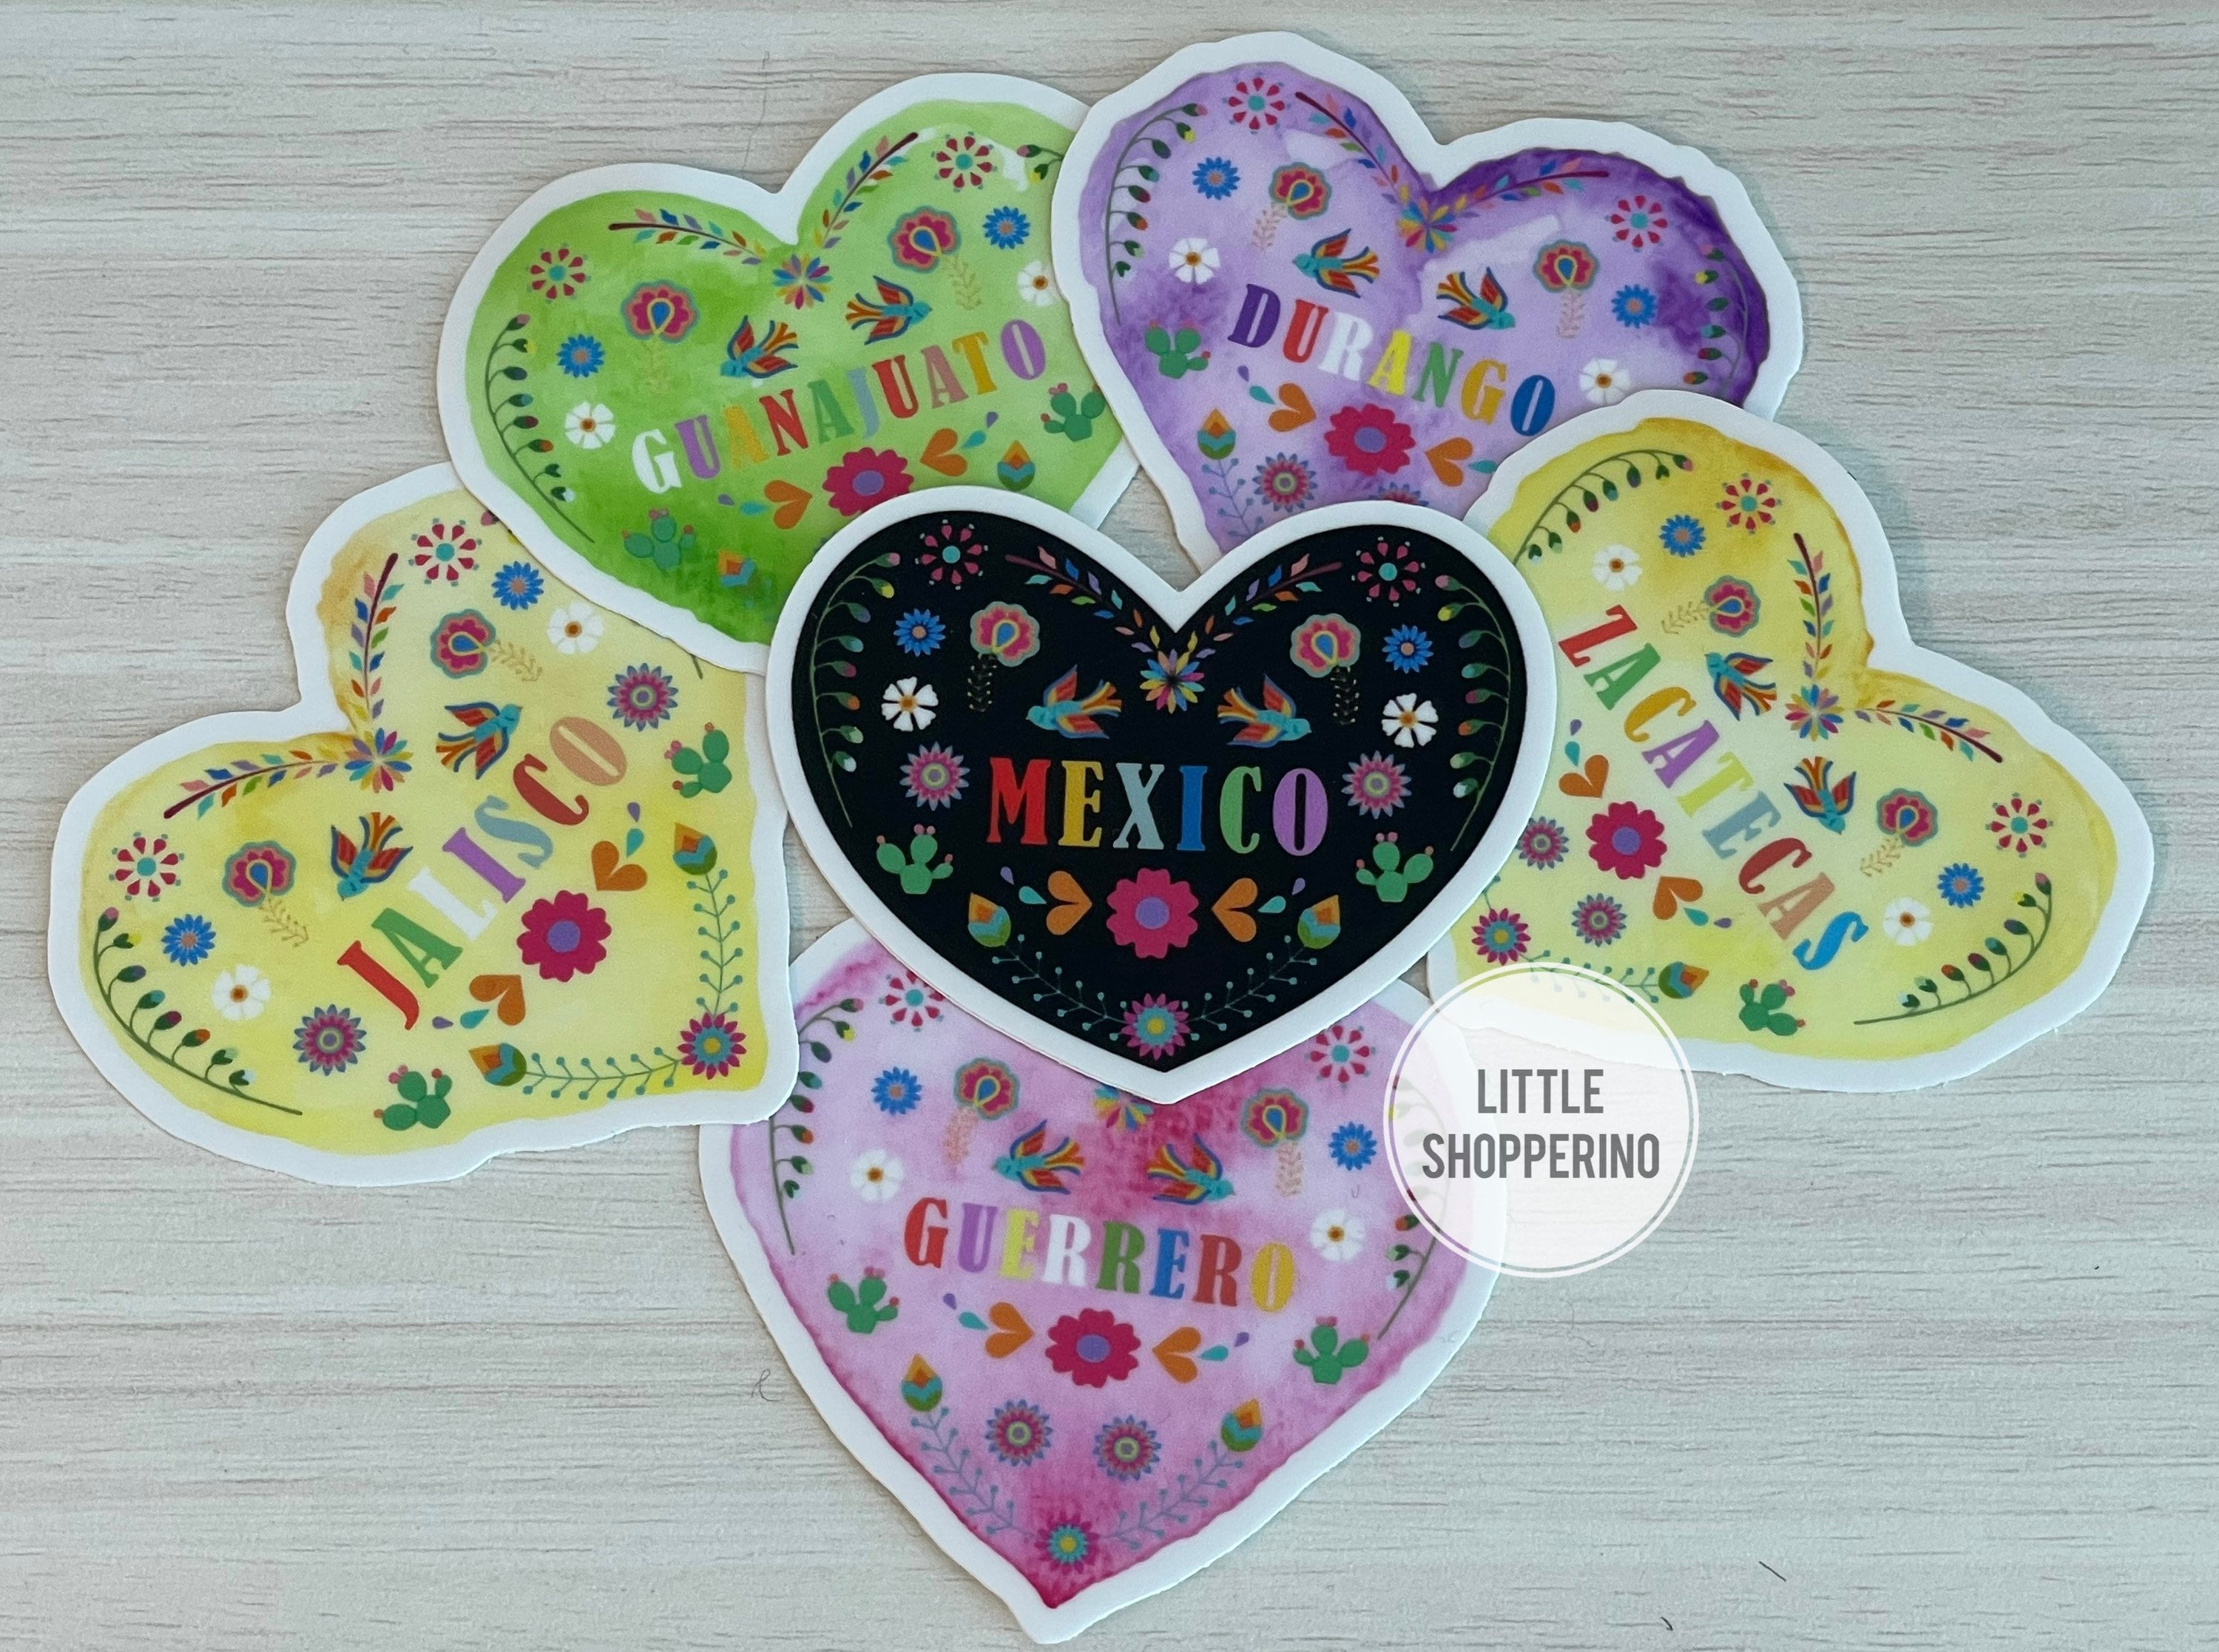 Mexico Theme Decals Set of 14 Waterproof Stickers - Oaxaca Culture, Frida,  Mexican art decor, Travel Oaxaca Food, Mexican Gift, Mexican Art